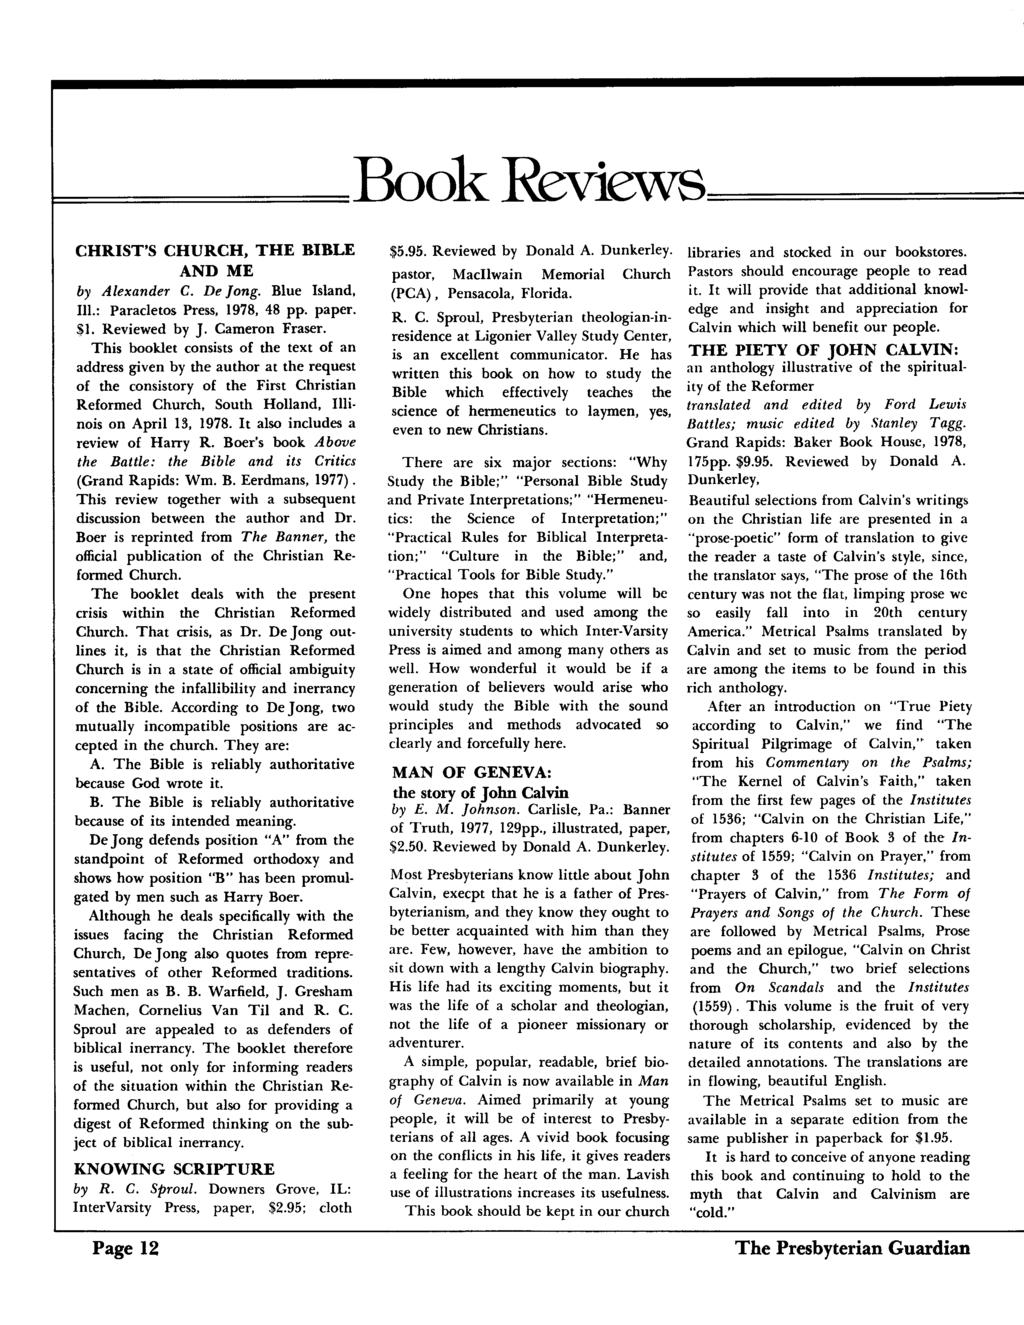 F=========Book Reviews===== CHRIST'S CHURCH, THE BIBLE AND ME by Alexander C. De Jong. Blue Island, Ill.: Paracletos Press, 1978, 48 pp. paper. $1. Reviewed by J. Cameron Fraser.